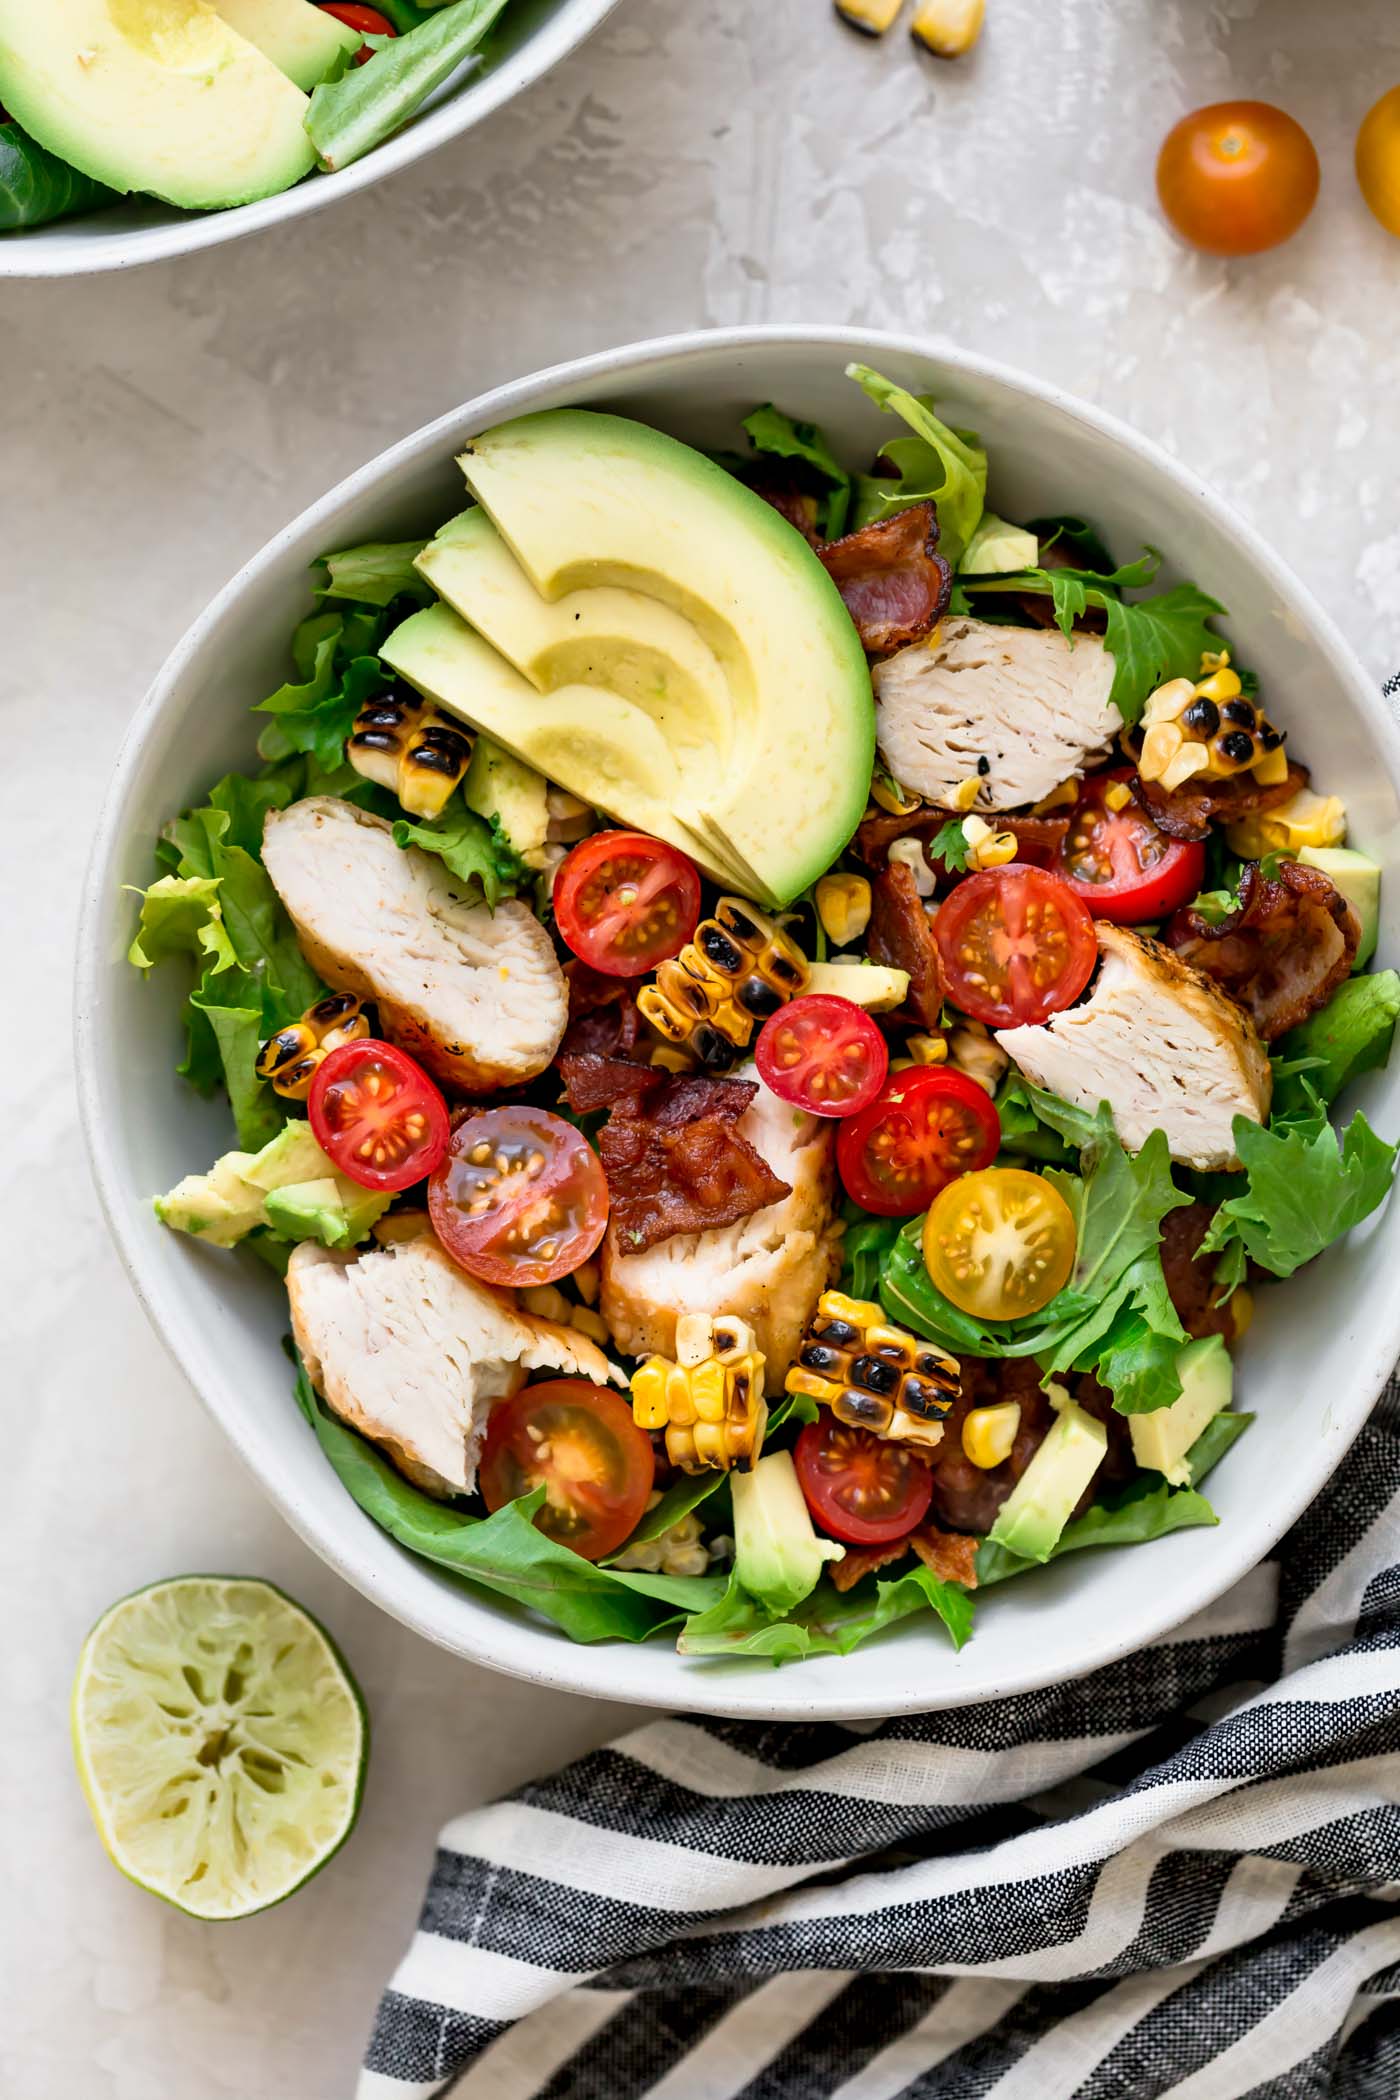 a light & fresh blt salad for summer loaded with bacon, cherry tomatoes, sweet corn, avocados, grilled chicken, & an easy cilantro basil vinaigrette. this blt salad recipe is hearty, but super fresh, making it the perfect easy summer dinner. naturally gluten-free & perfect for meal prep! #playswellwithbutter #bltsalad #saladrecipe #dinnersalad #summersalad #glutenfree #easyglutenfreerecipes